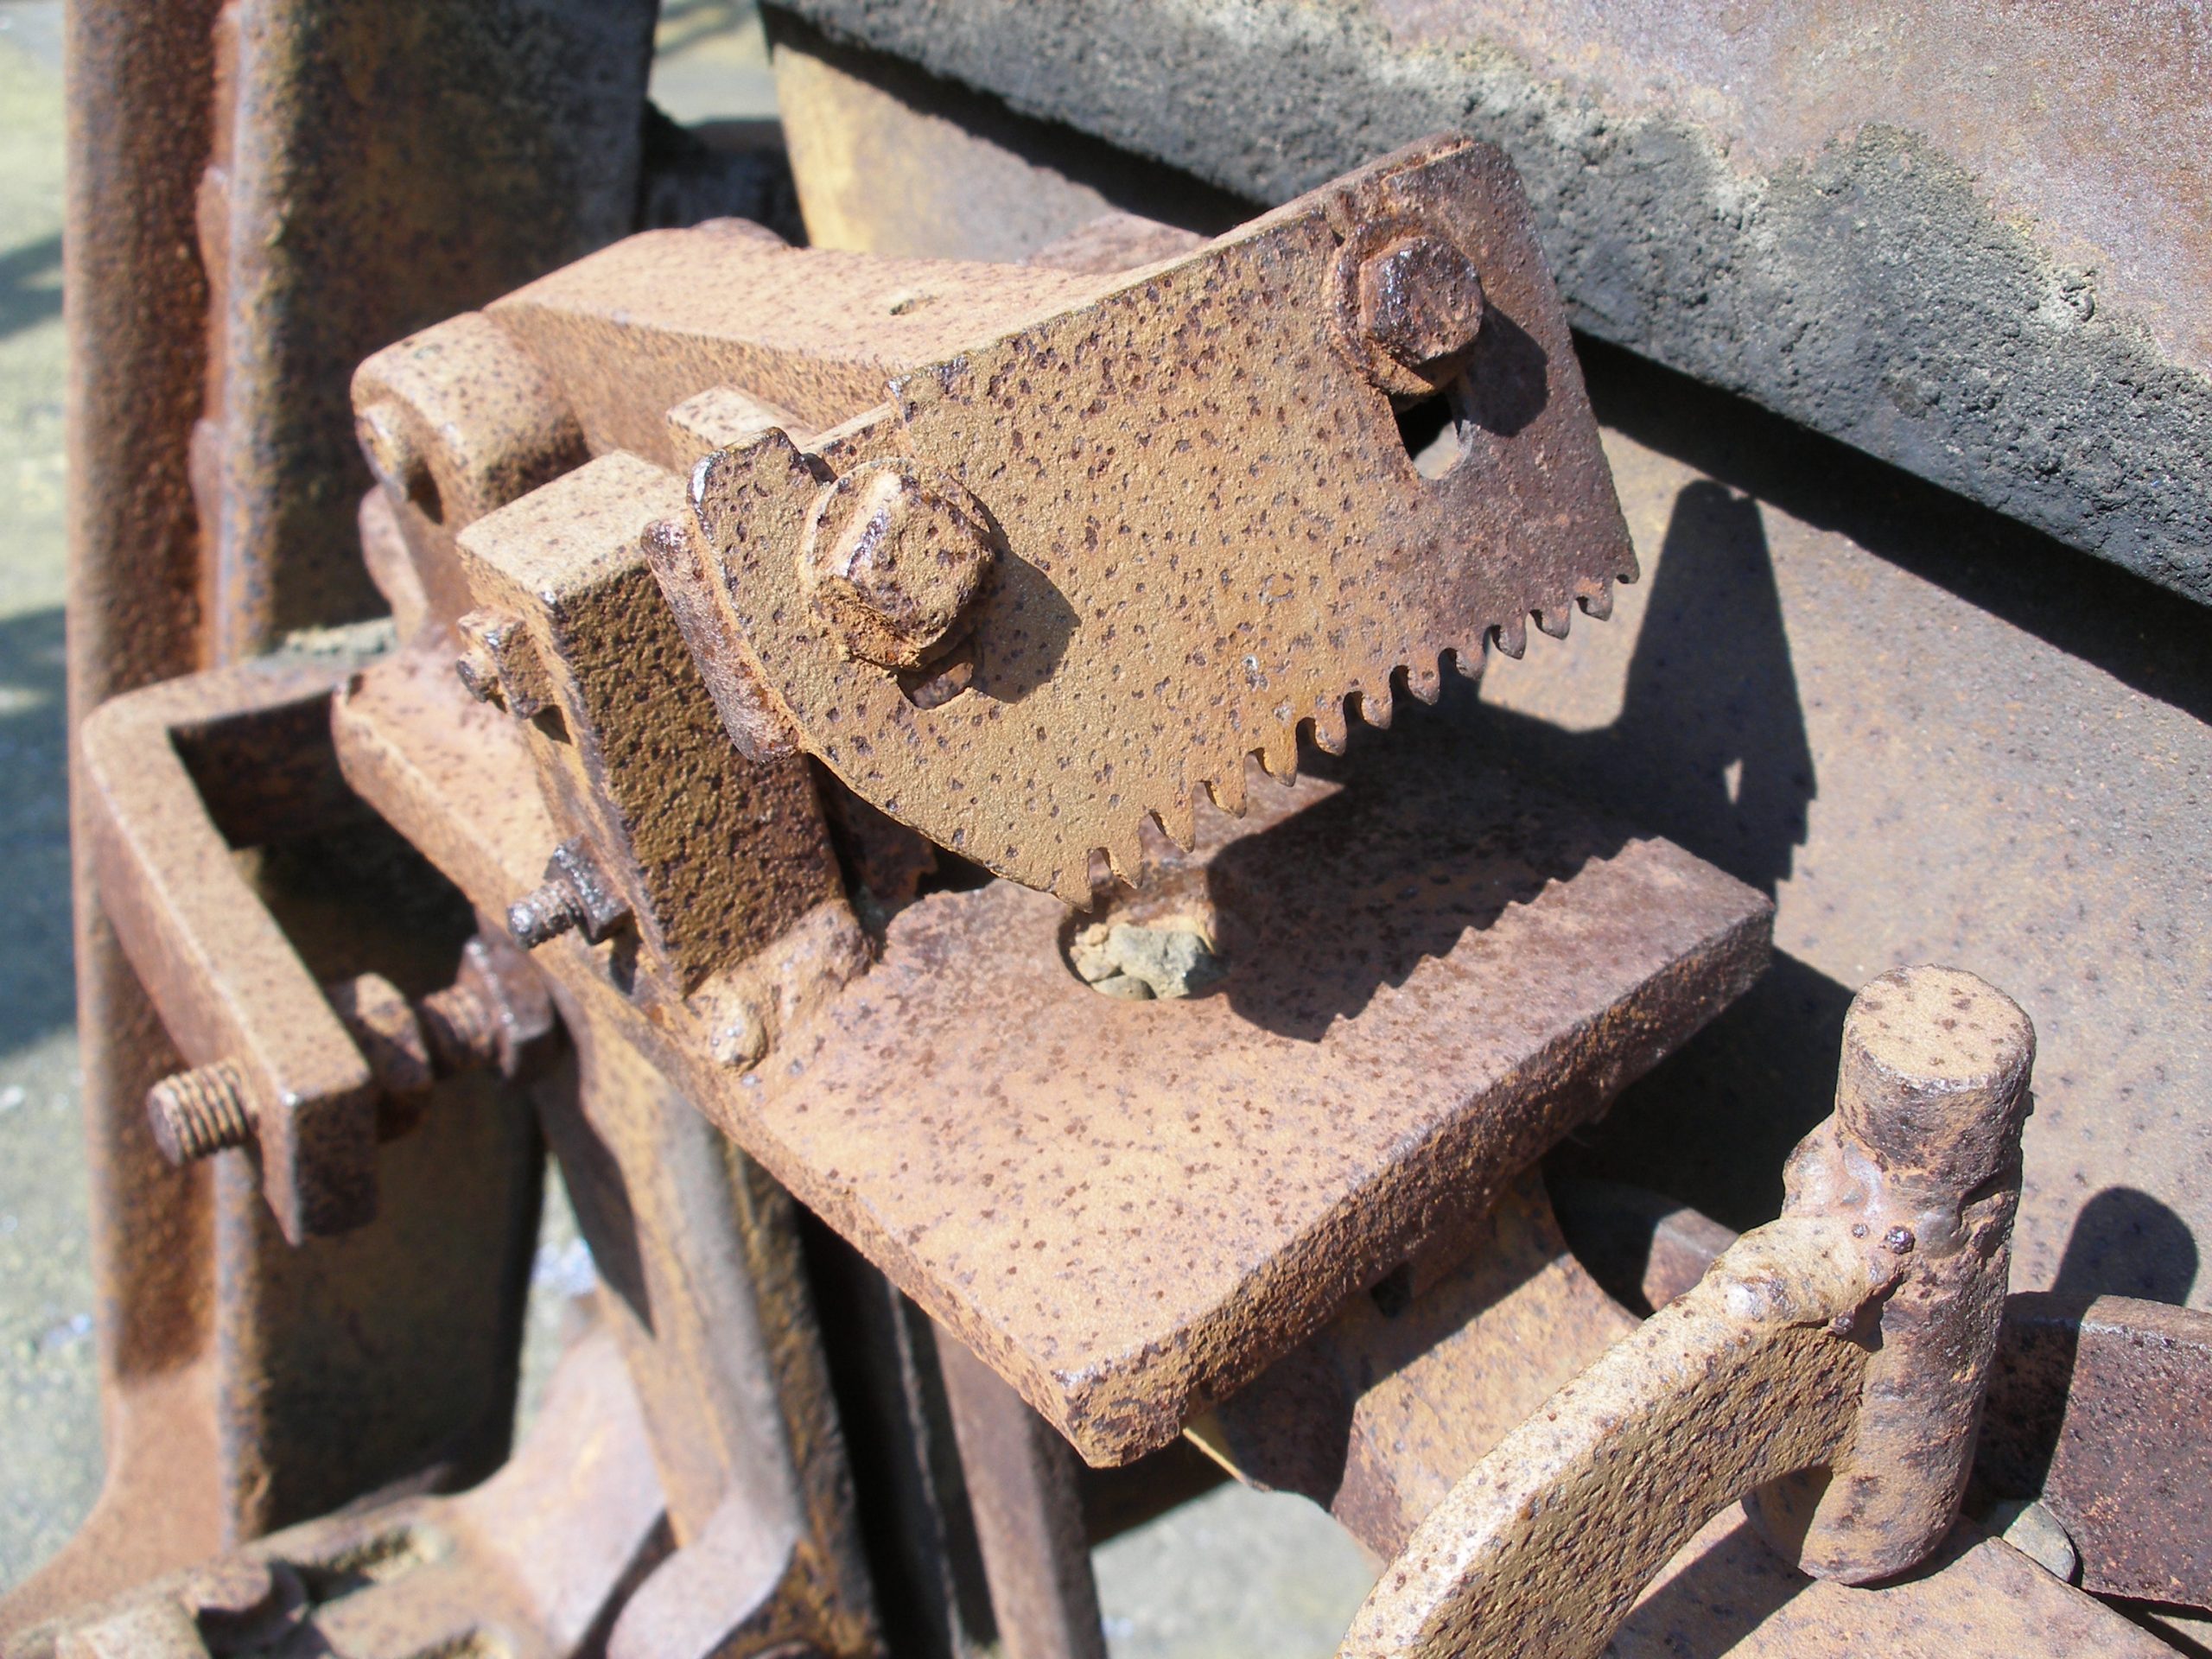 Example of Pareidolia - jumble of rusty metal that looks like a face